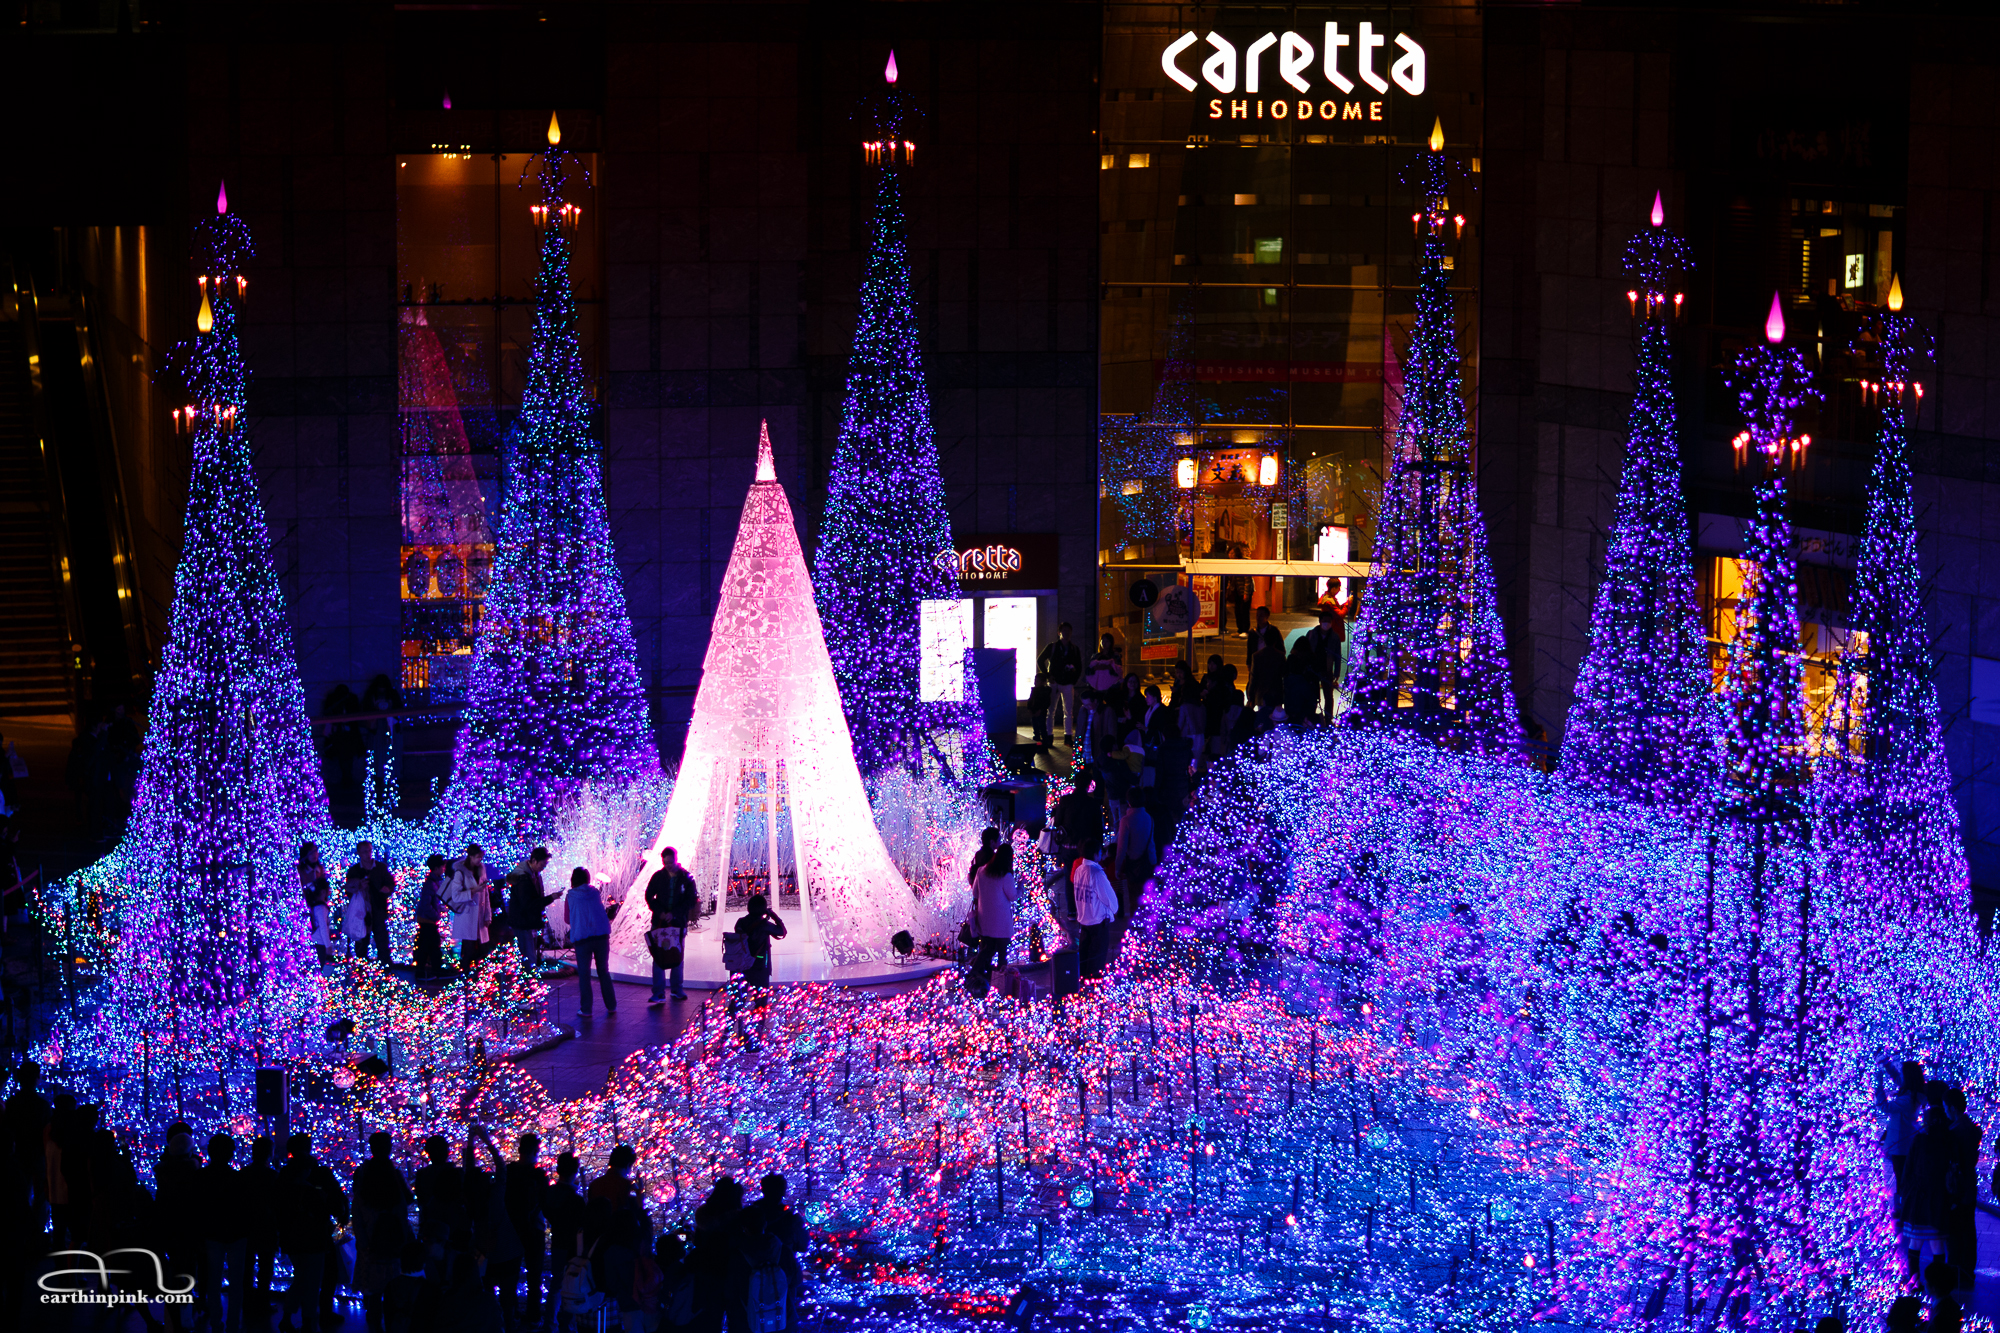 Caretta Shiodome illumination 2014: an amazing installation, with a light-show accompanied by music every 15 min or so. I don't think they know one of the musical pieces is the same they always play in the immigration and passport control area at SFO ;)